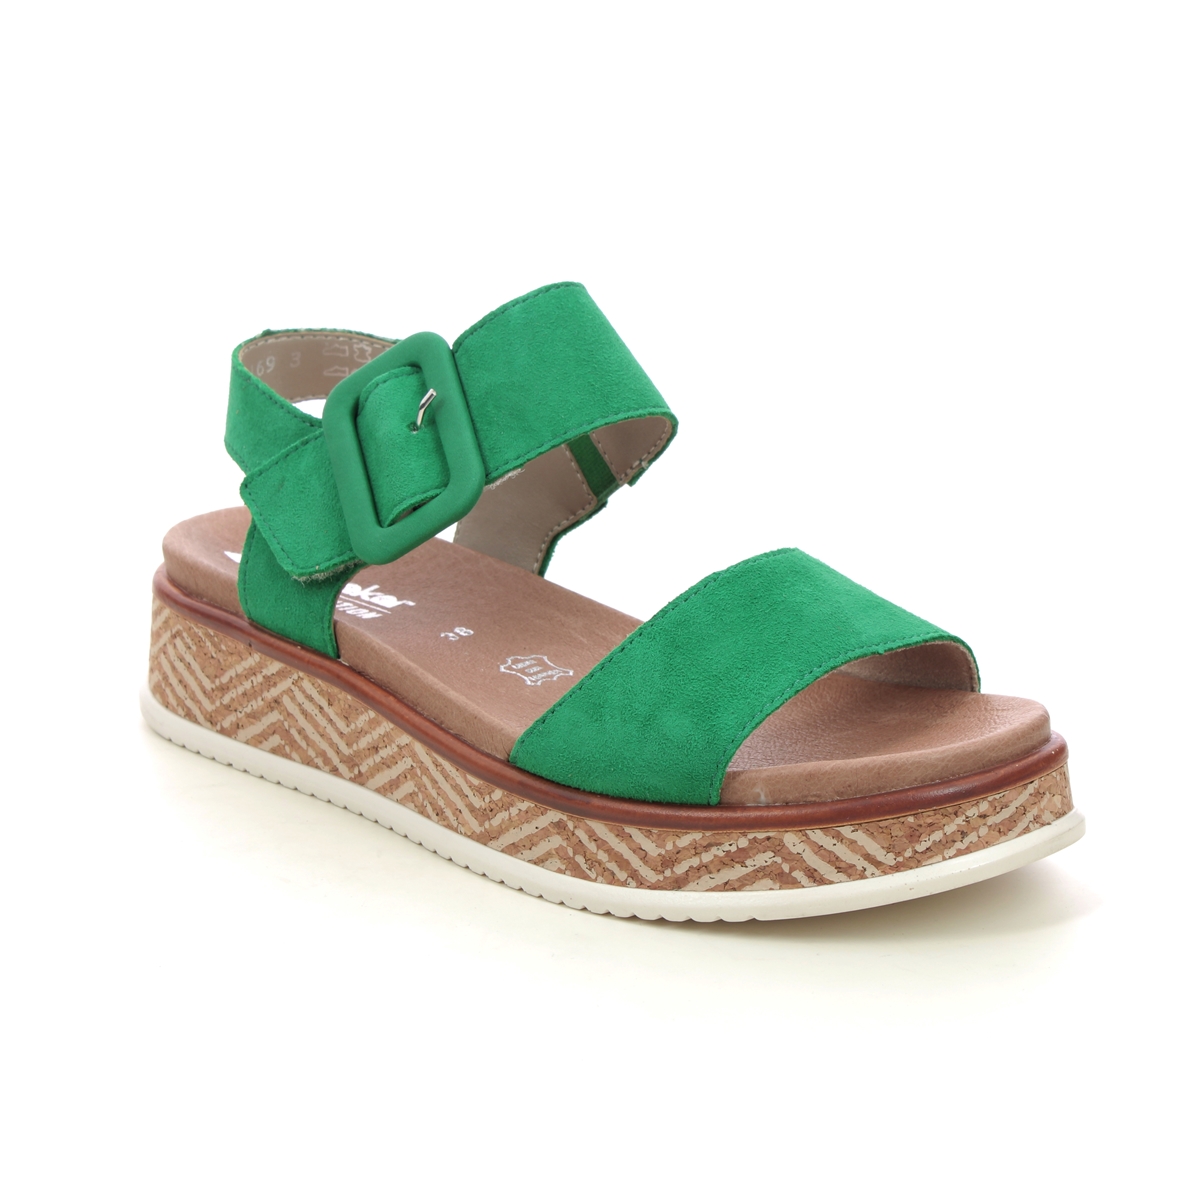 Rieker W0800-52 Green Suede Womens Flat Sandals in a Plain Leather in Size 41